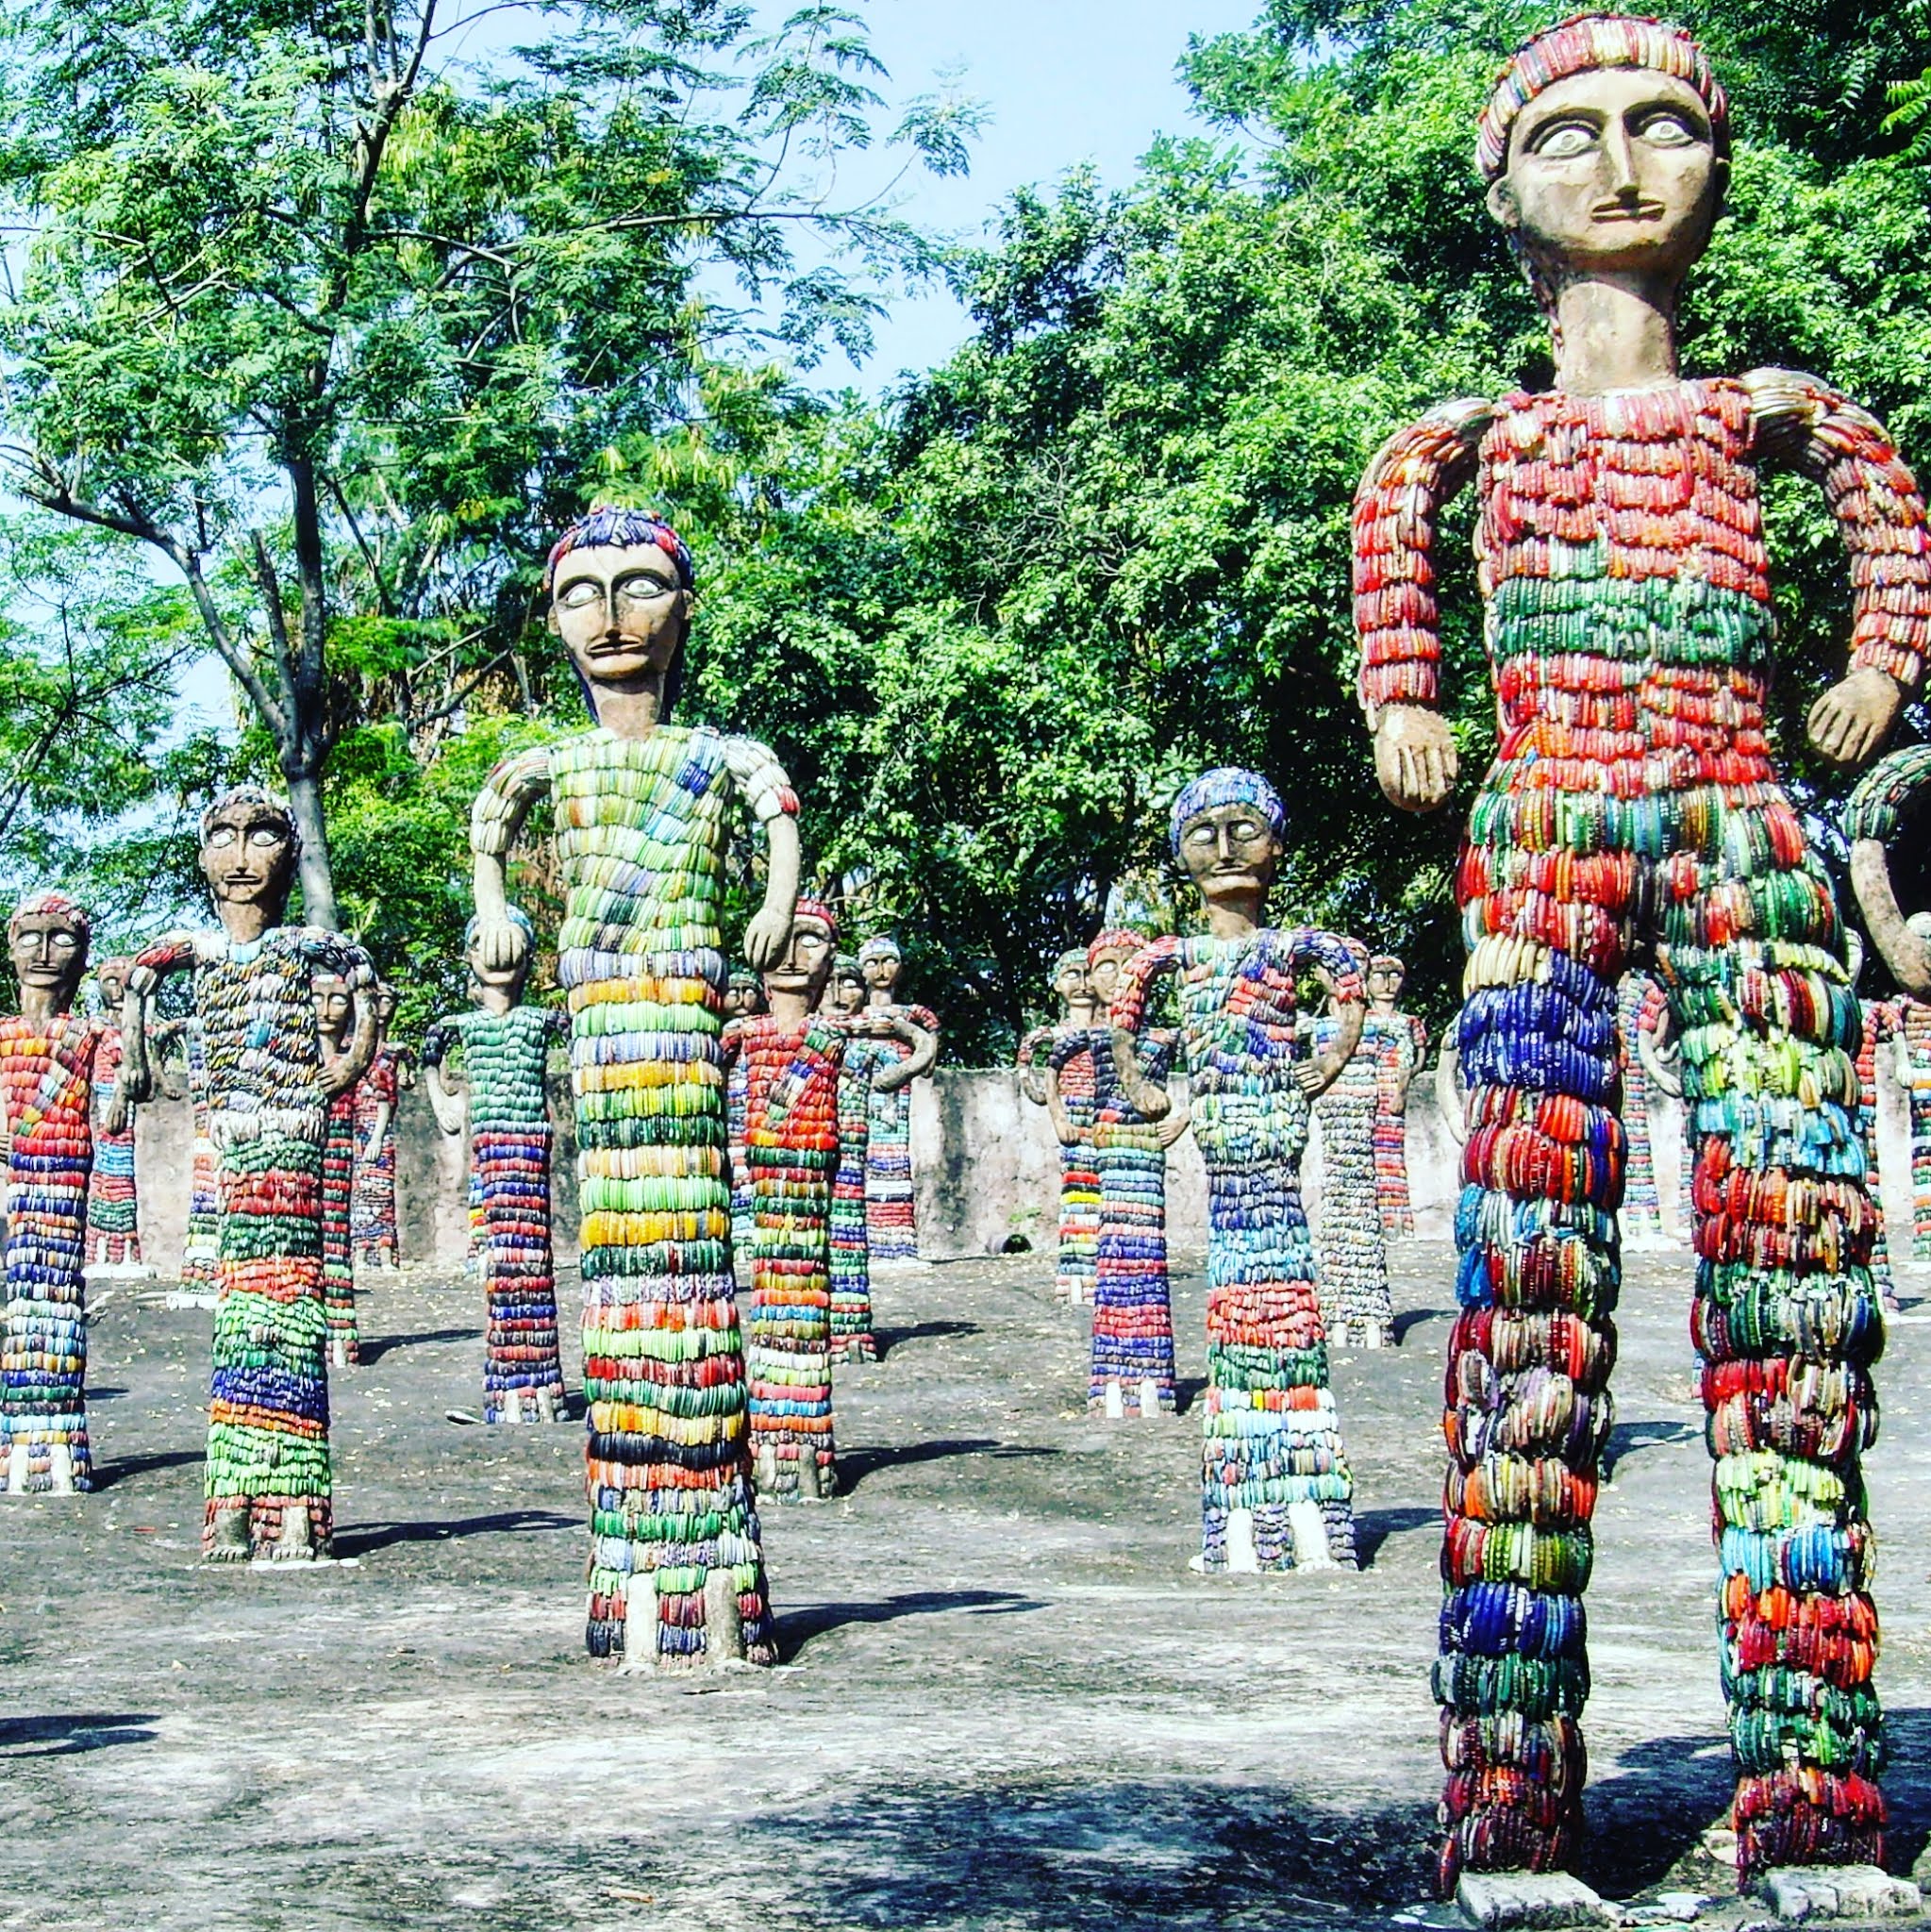 statues of women made from stone and broken bangles at the nek chand rock garden in chandigarh, India